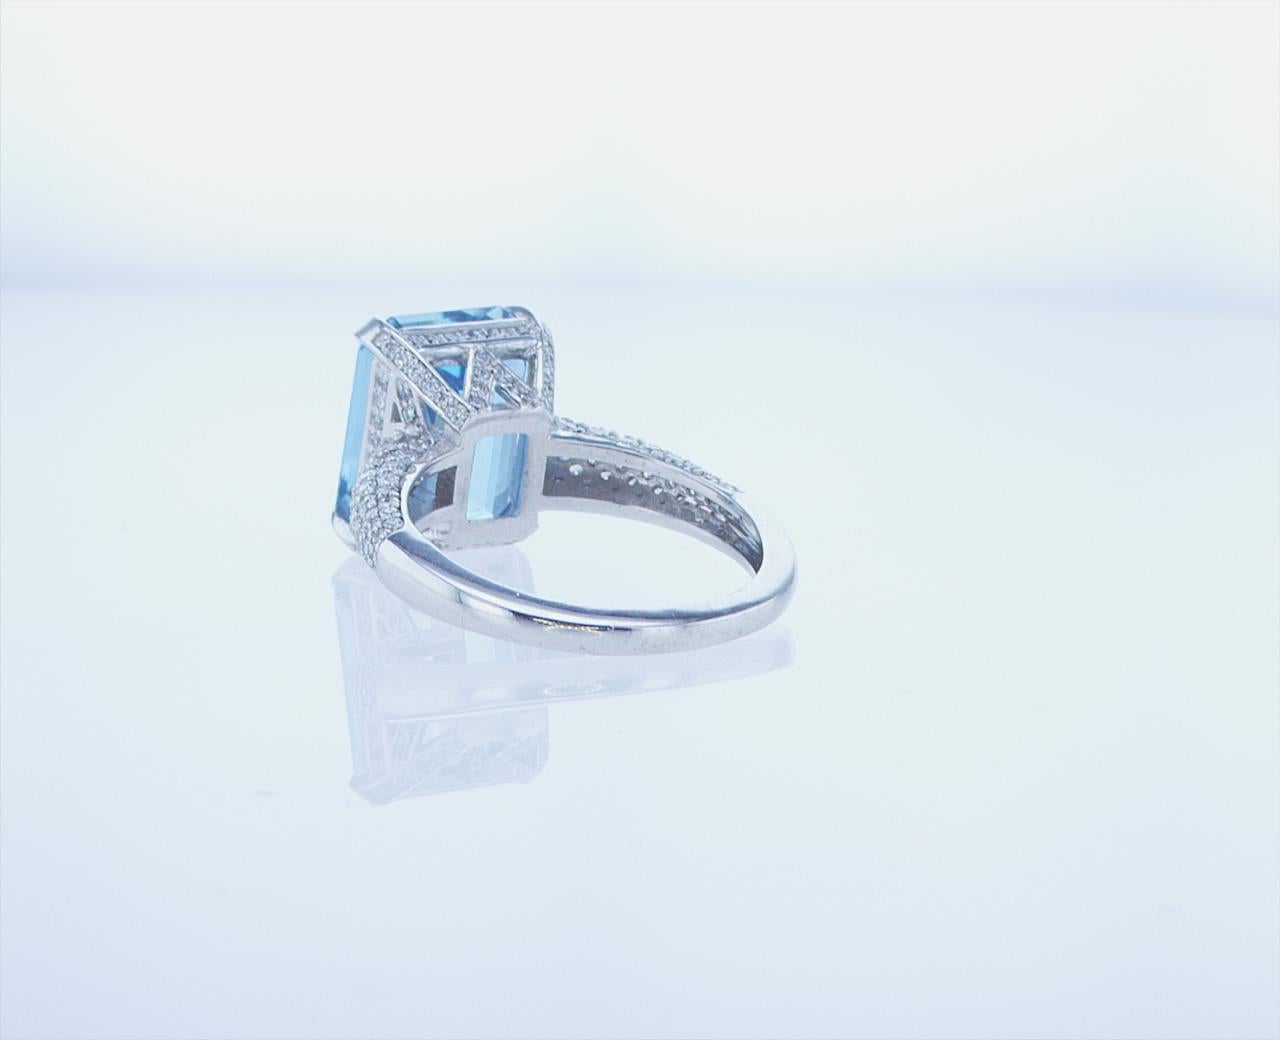 5.37 Ct Aqua Cocktail Ring in 18k White Gold with Palladium For Sale 6